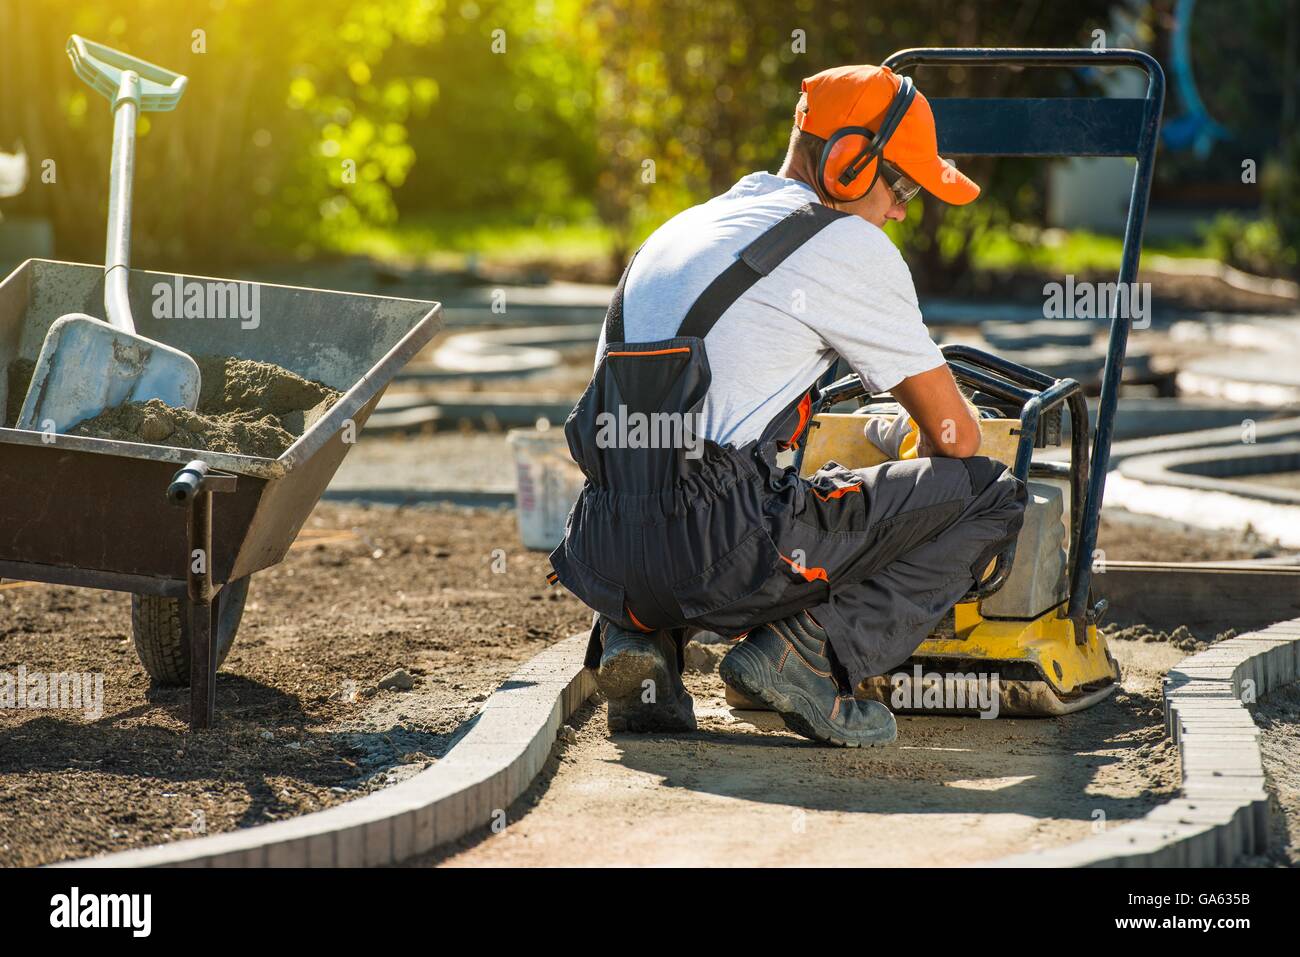 Plate Compactor Brick Works. Professional Brick Paver and His Plate Compactor at Work. Stock Photo